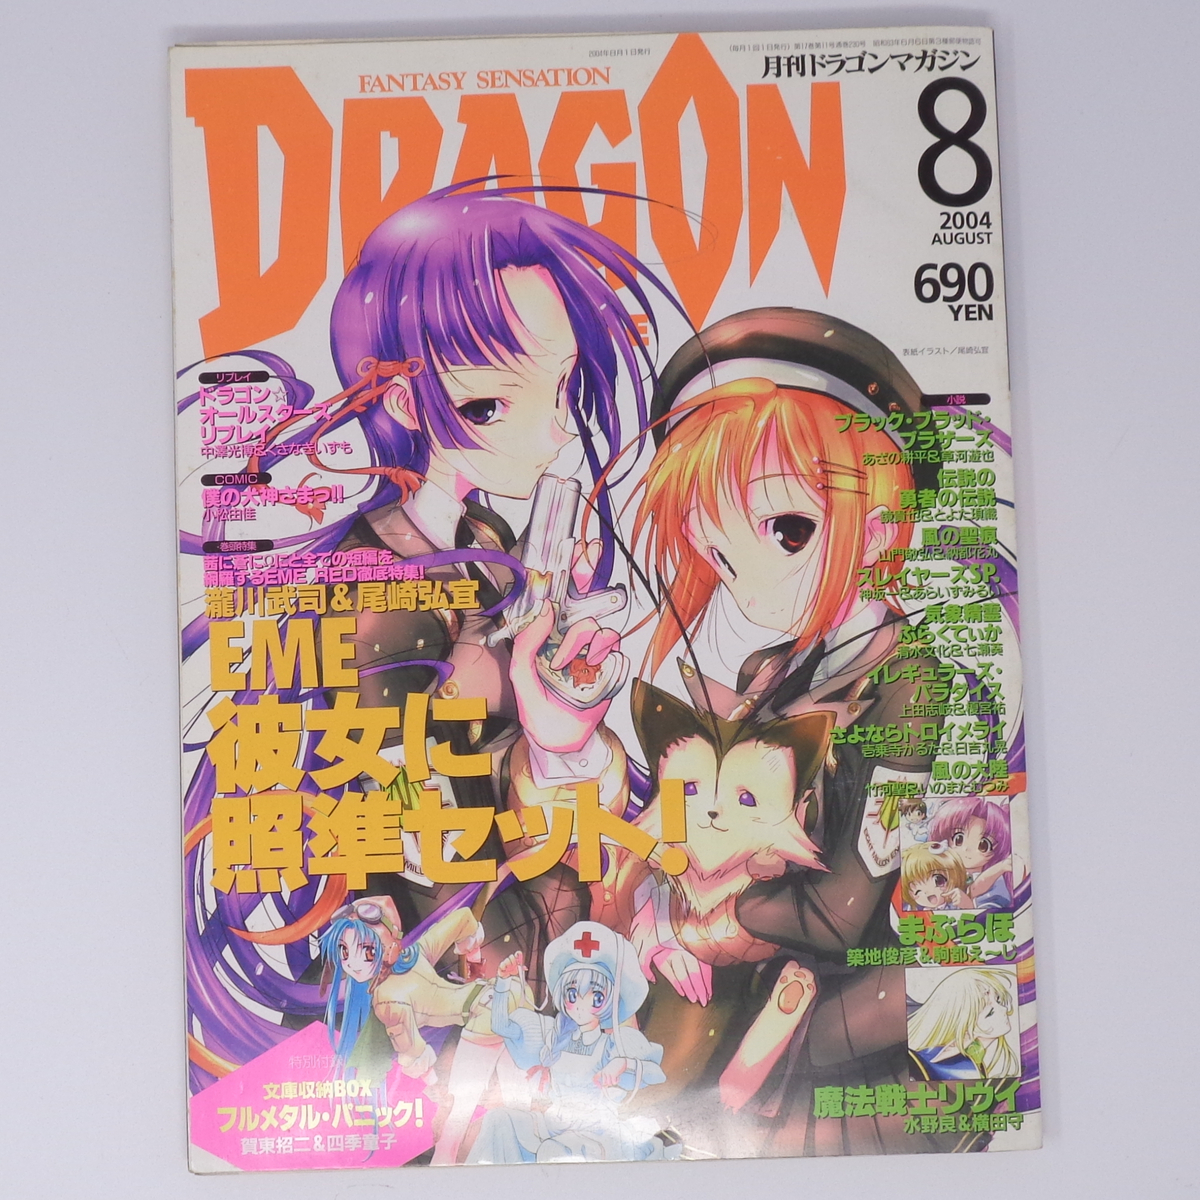  monthly Dragon magazine DRAGON MAGAZINE 2004 year 8 month number separate volume appendix less /..../ Slayers SP./ magazine [Free Shipping]